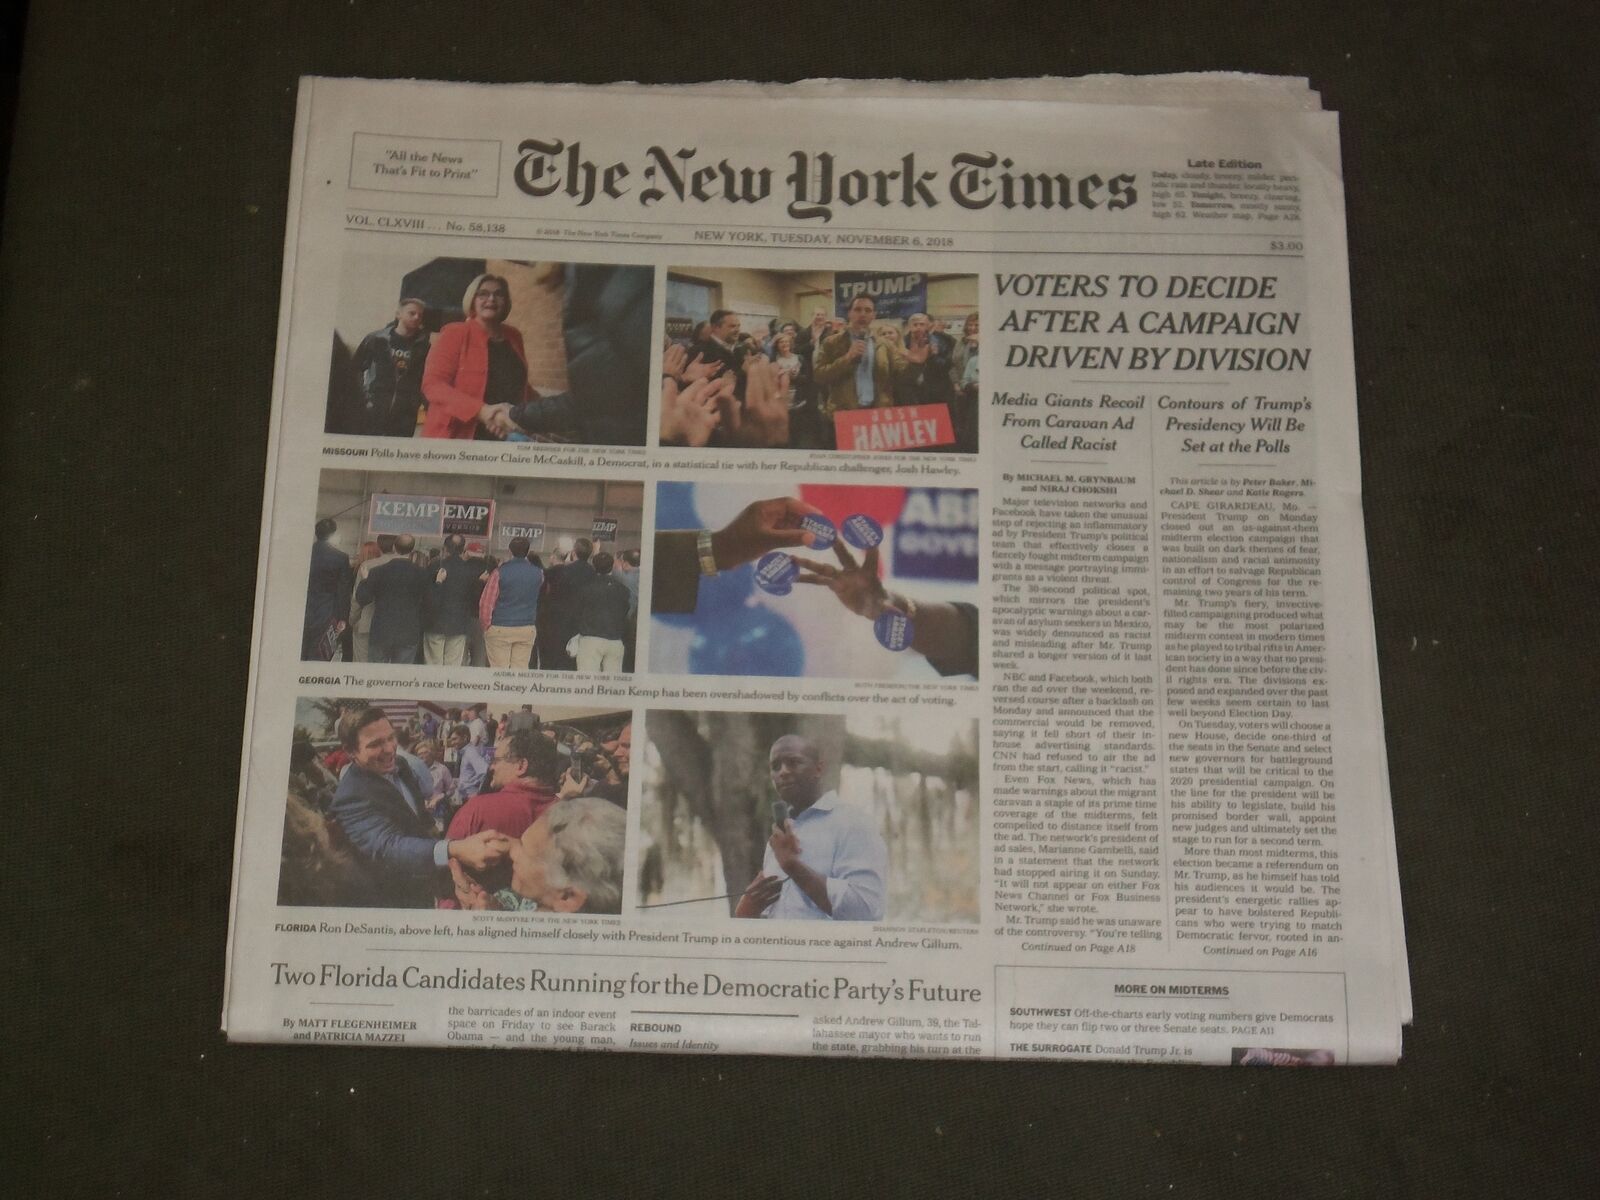 2018 NOVEMBER 6 NEW YORK TIMES - MID TERM ELECTIONS DAY-DIVIDED VOTERS TO DECIDE